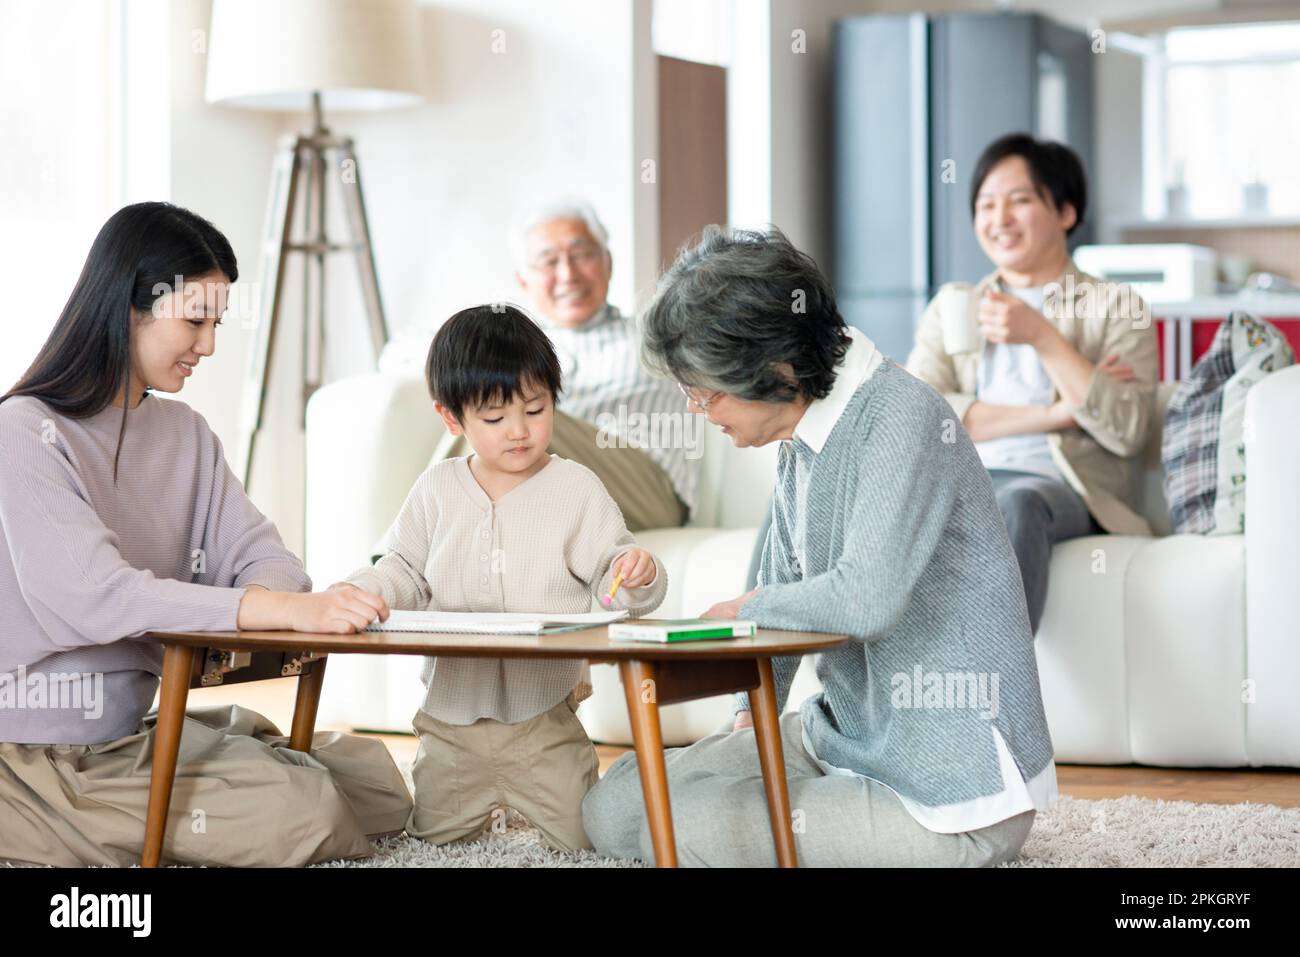 Family of 3 generations drawing Stock Photo